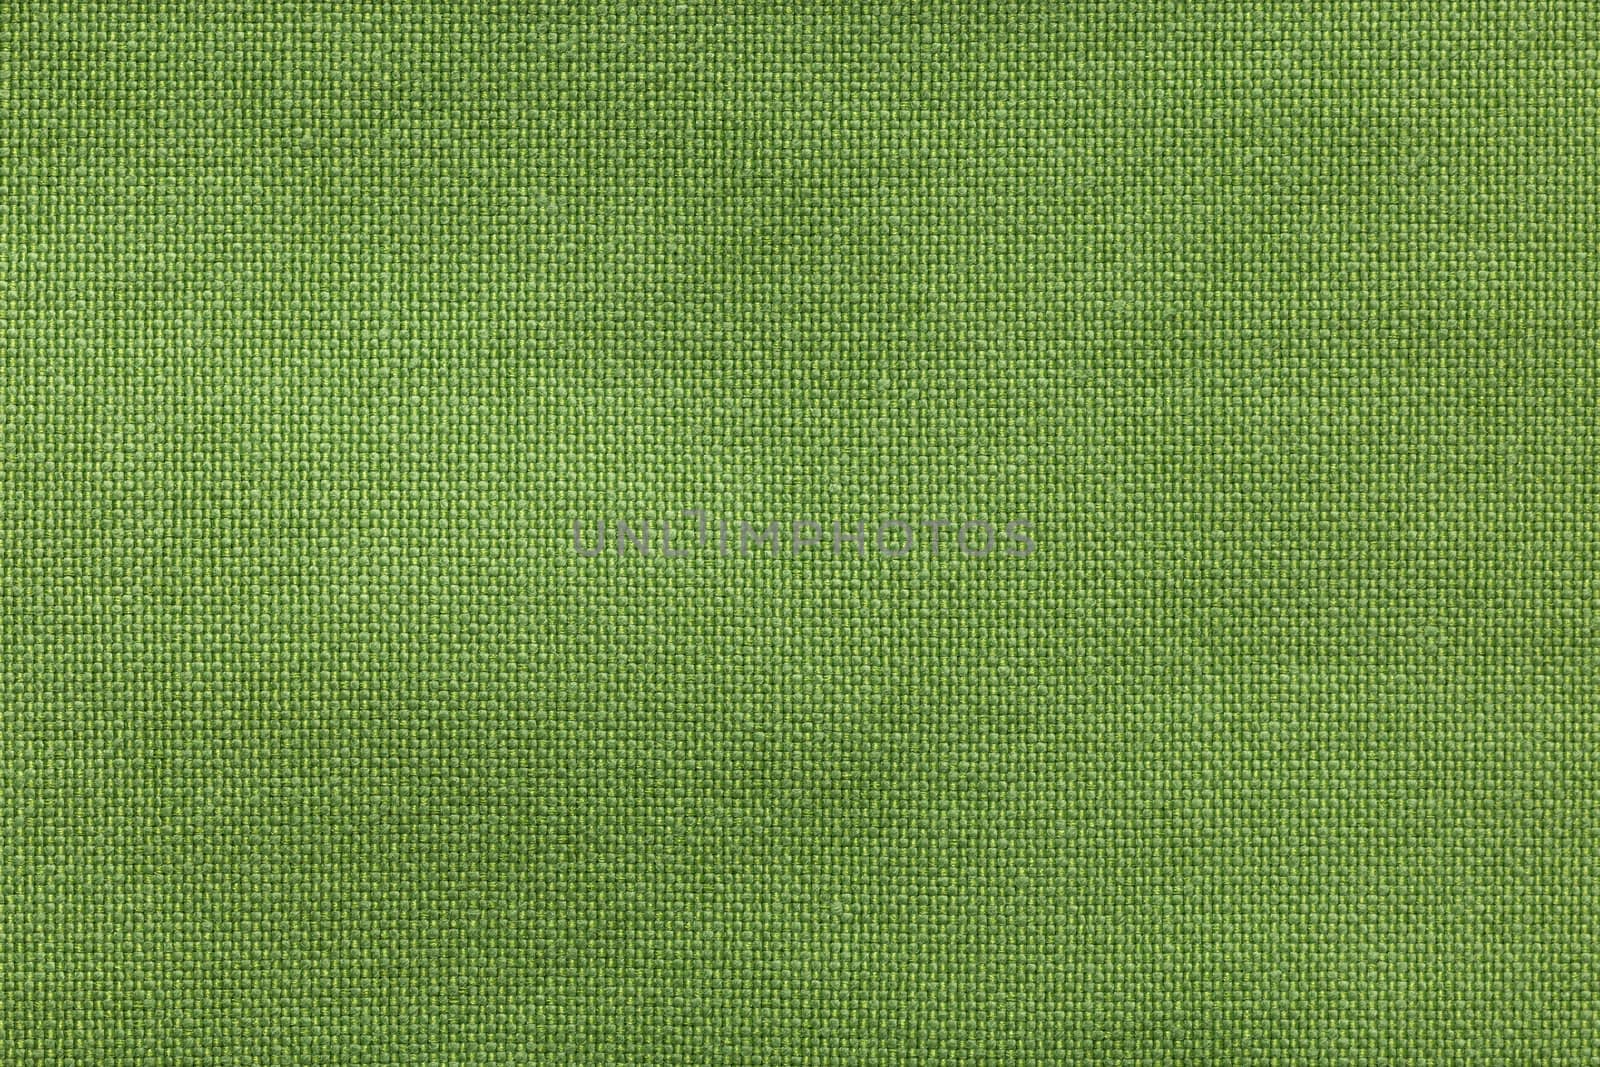 textured background rough fabric of green olive color by ivo_13